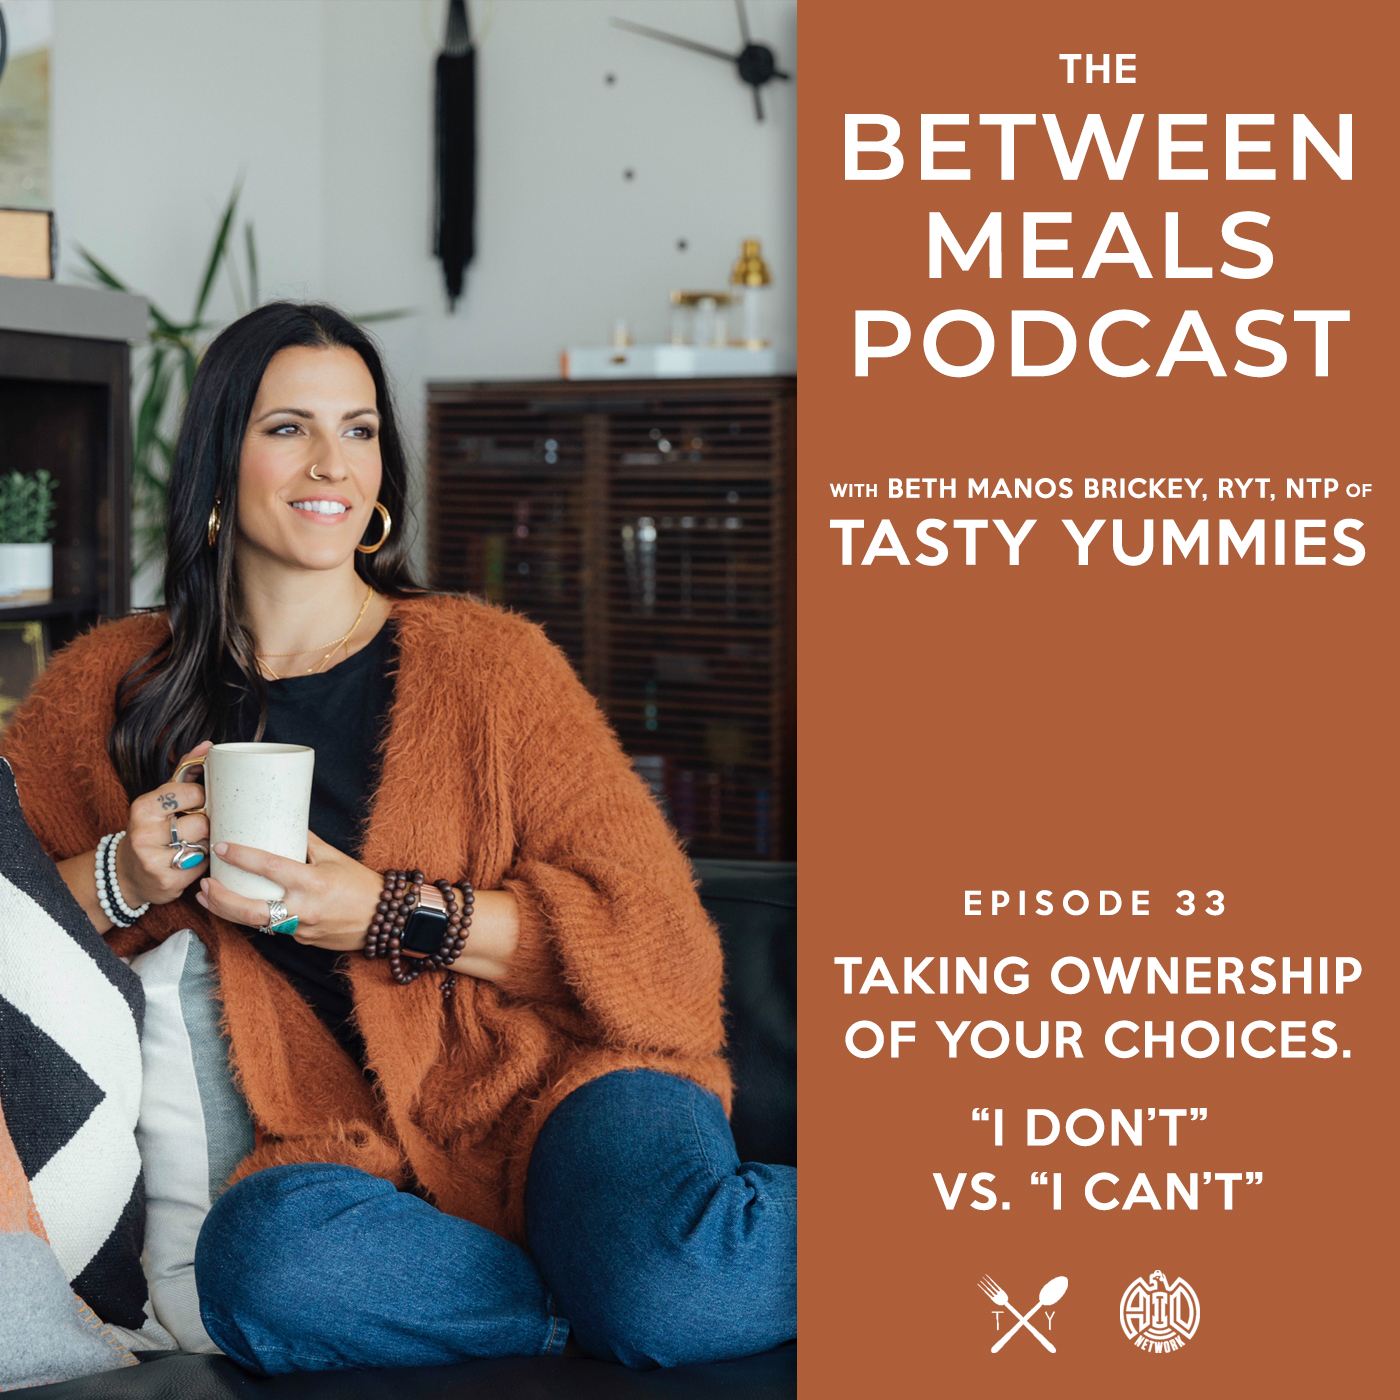 Between Meals Podcast. Episode 33: Taking Ownership of Your Choices